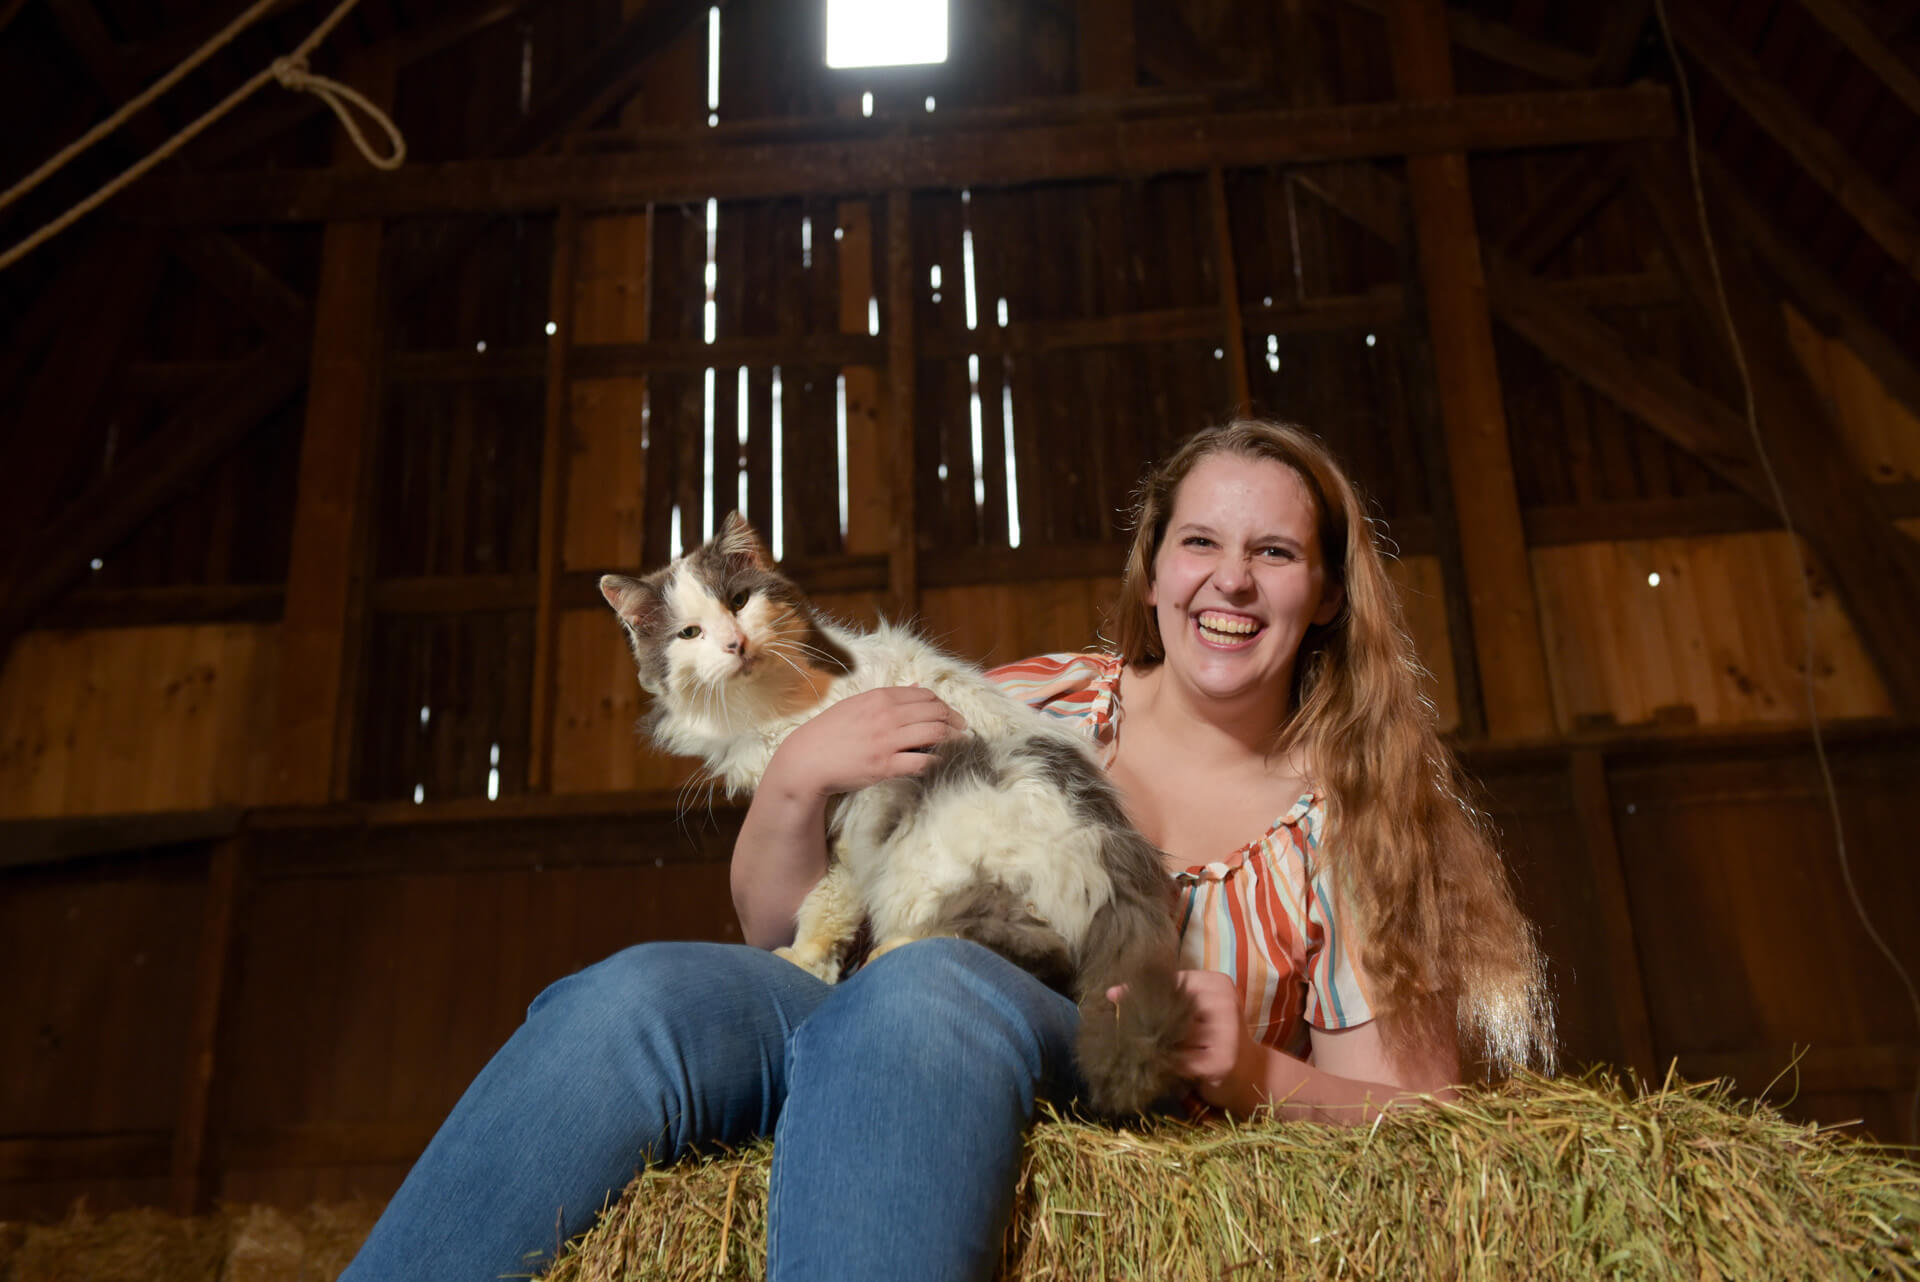 A senior who love animals wanted a variety of images for her Troy, Michigan senior photos taken at a farm near Troy, Michigan .